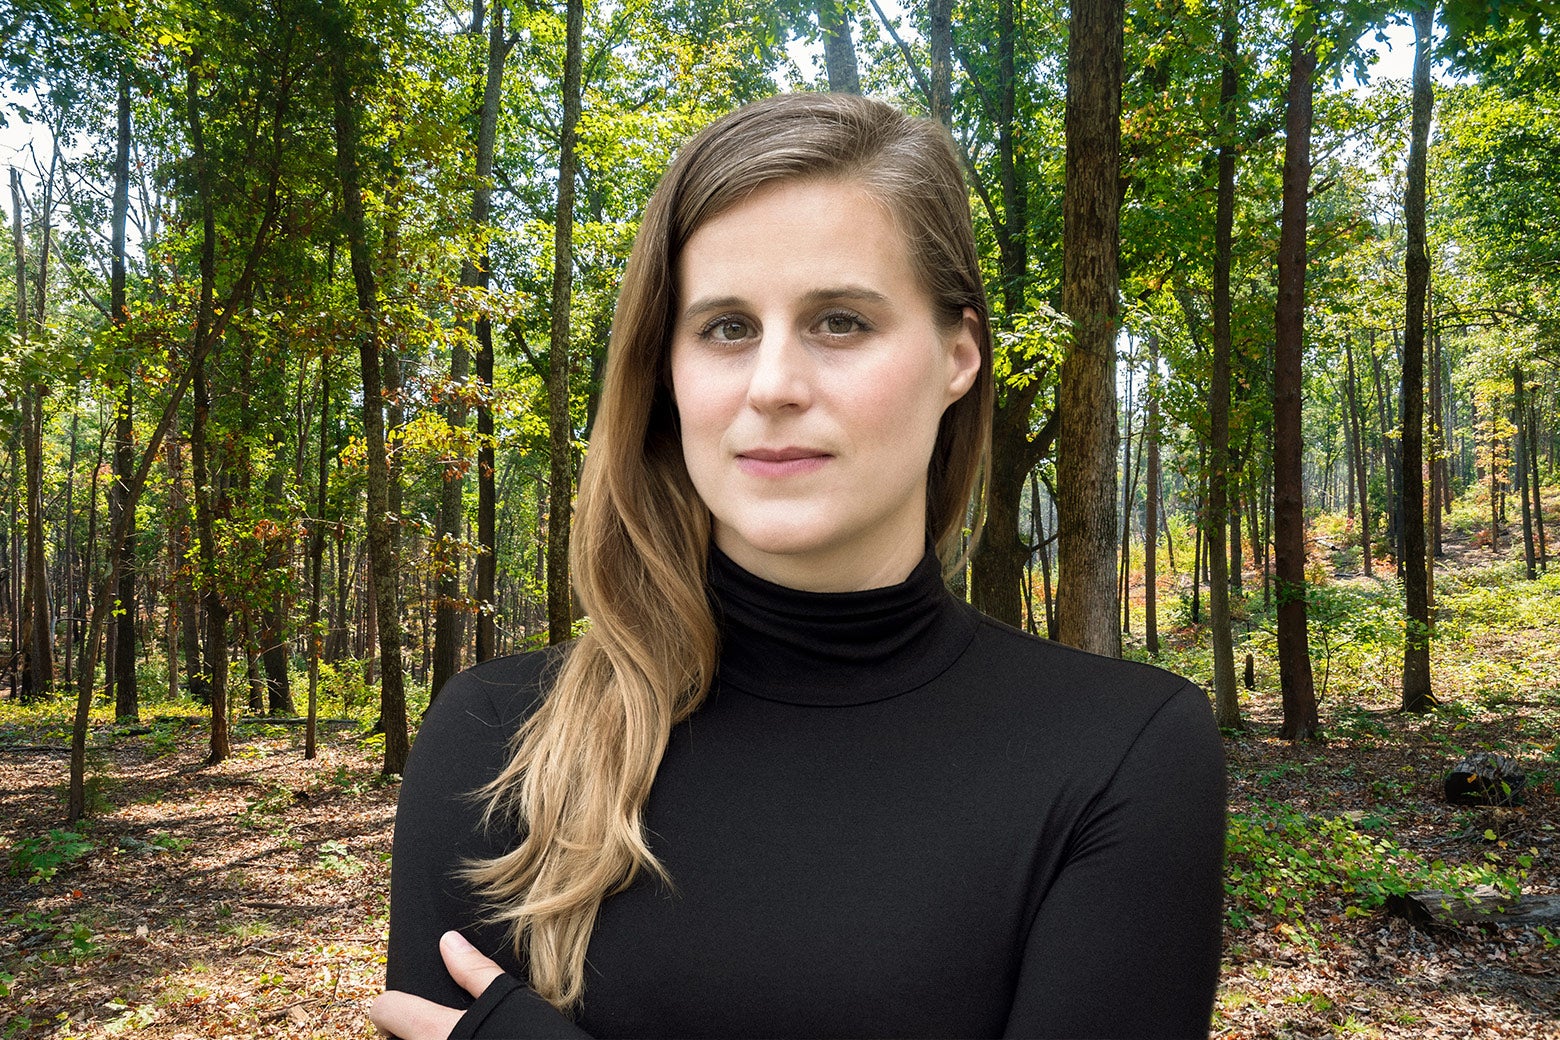 A woman in a black turtleneck looks at the camera. Behind her, a sunlit forest.